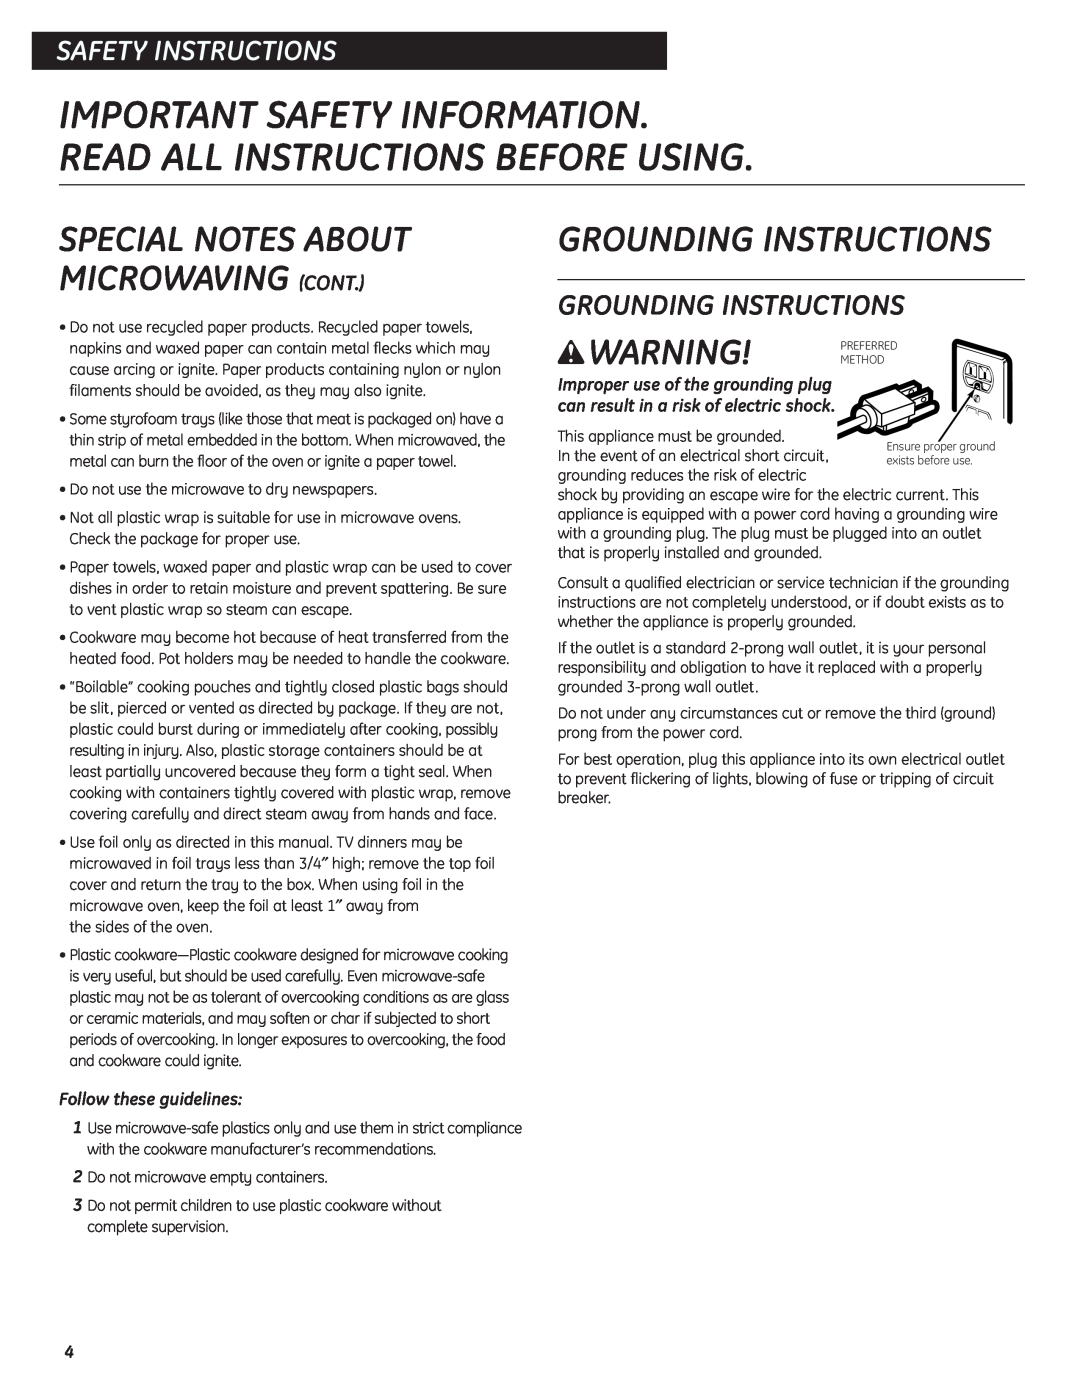 GE JES737 Grounding Instructions, Follow these guidelines, Special Notes About Microwaving Cont, Safety Instructions 